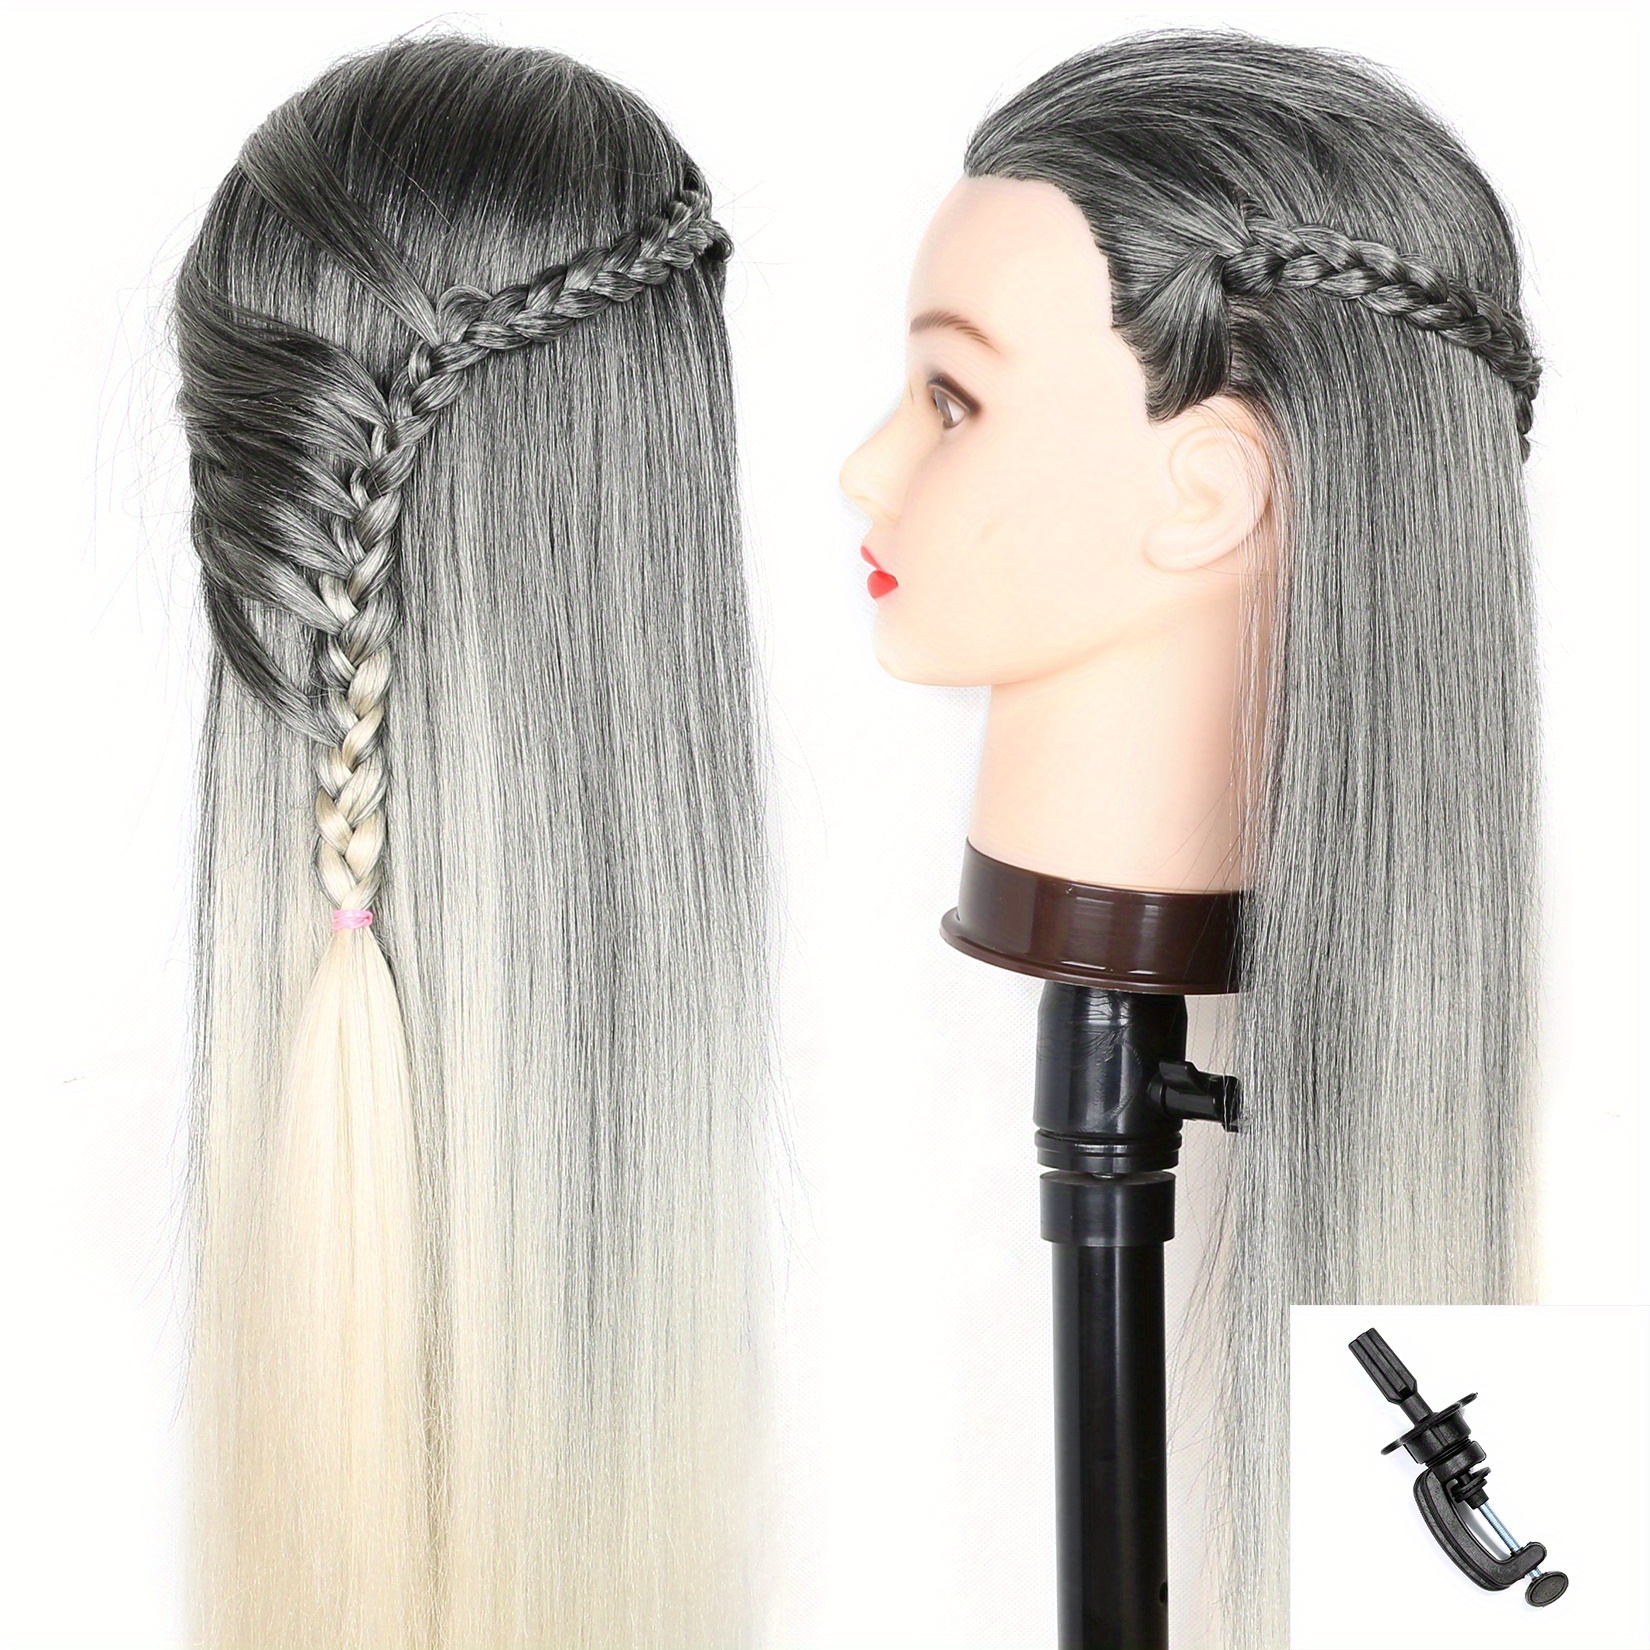 Neverland Training Head, 30 Inch Brown 100% Synthetic Fiber Hair  Hairdressing Hairdresser Mannequin Styling Dolls Head Practice Braiding  with Table